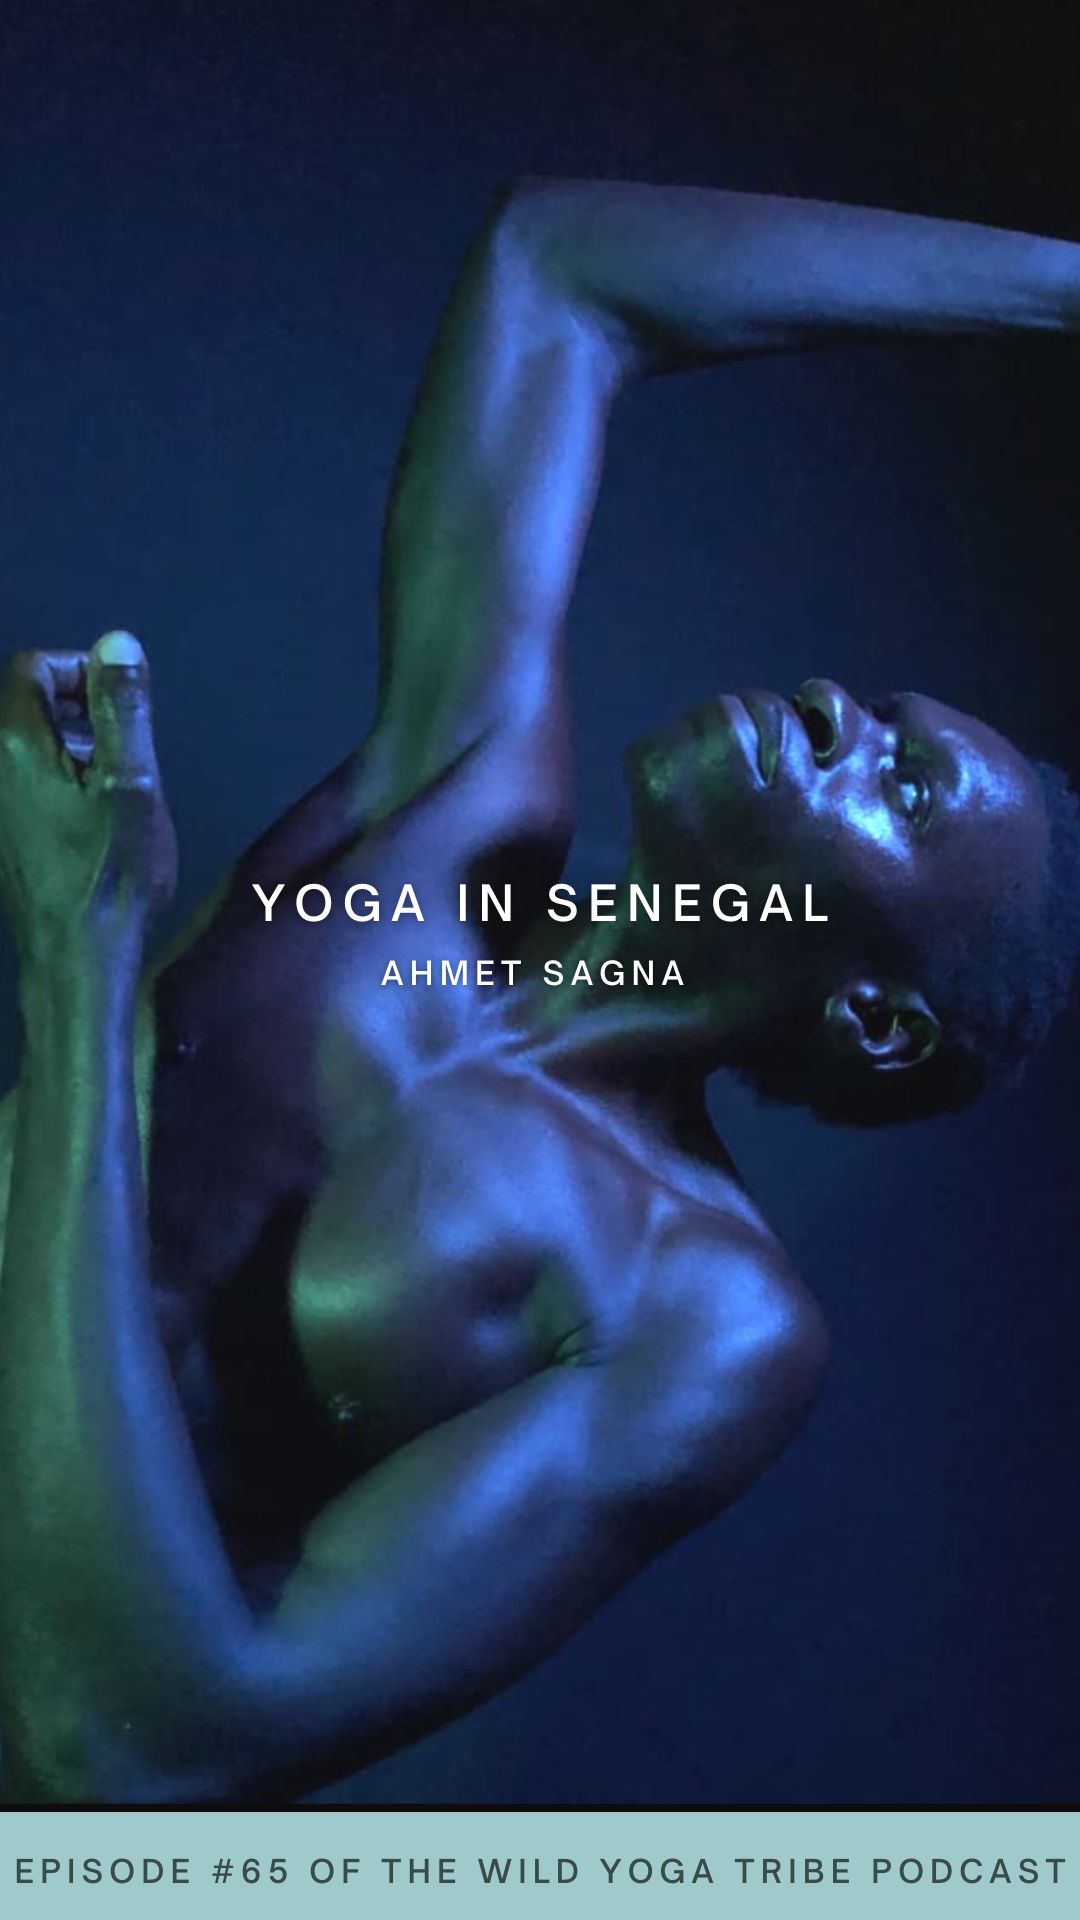 Meet Ahmet Sanga, a yoga teacher from Senegal who discusses with us how yoga brings love to his life and why it’s important for yoga to be all around the world! Welcome to yoga in Senegal!